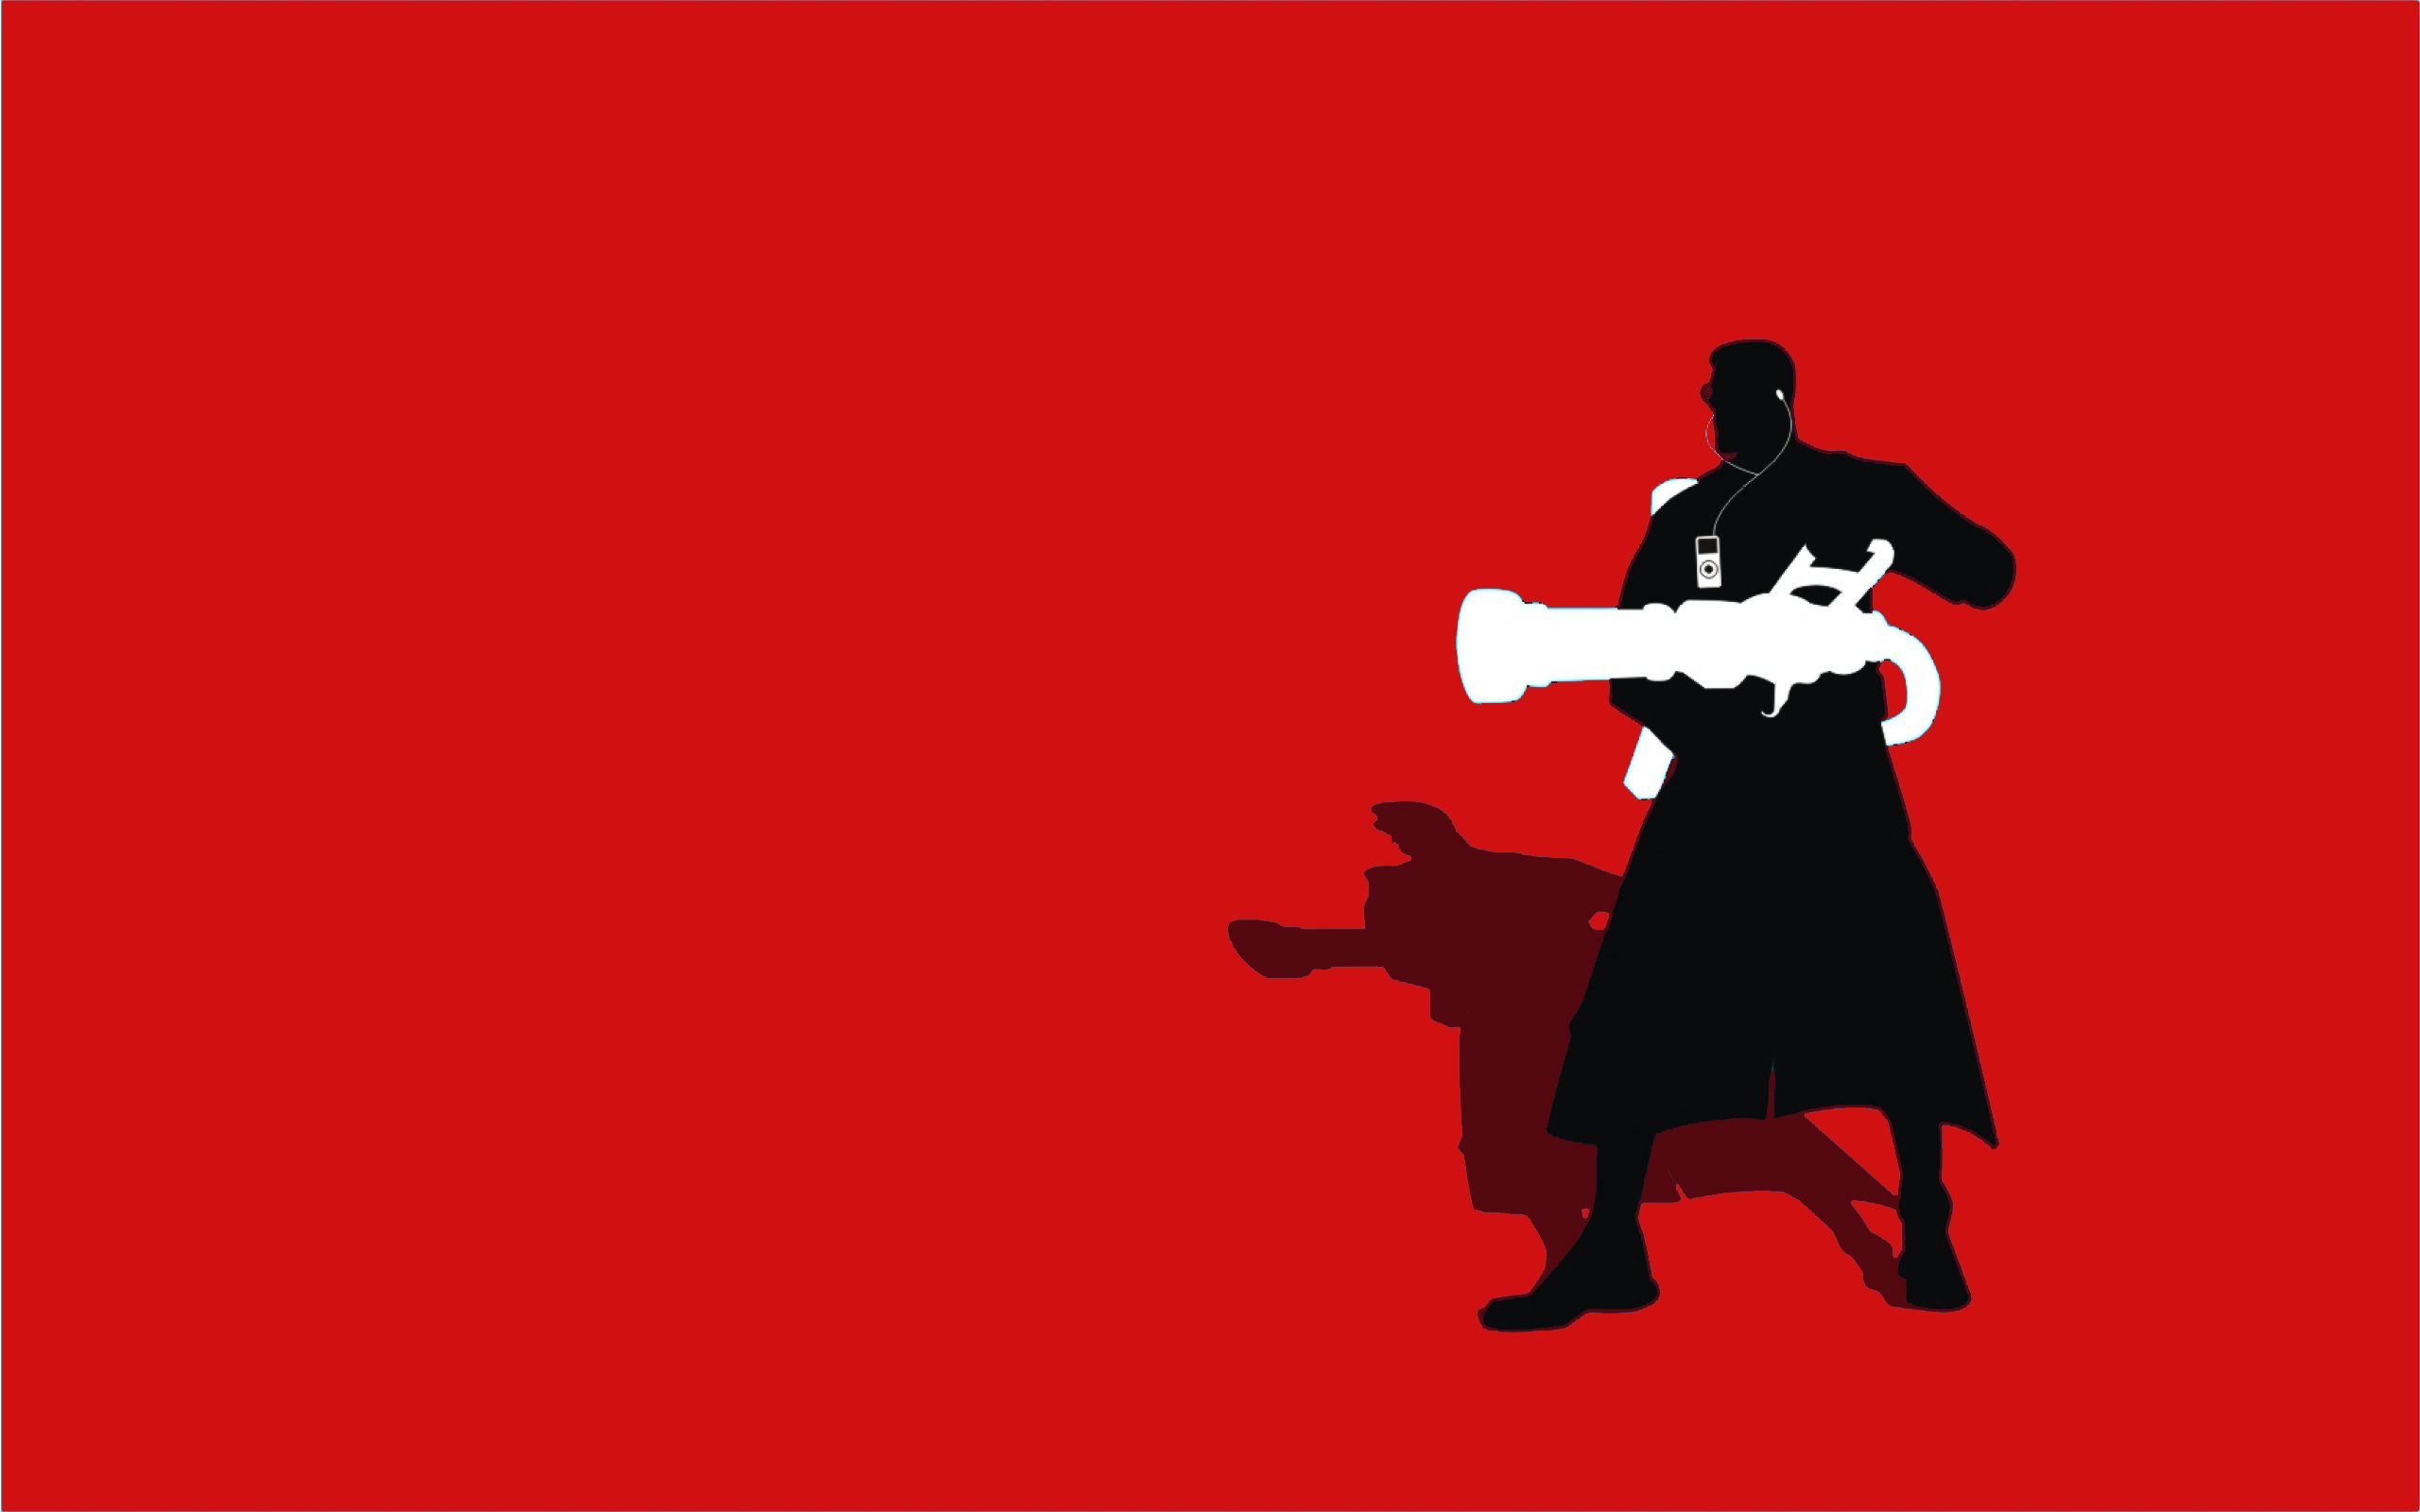 TF2 Blue Medic Silhouette iPod Earbuds 2560x1600 by cwegrecki